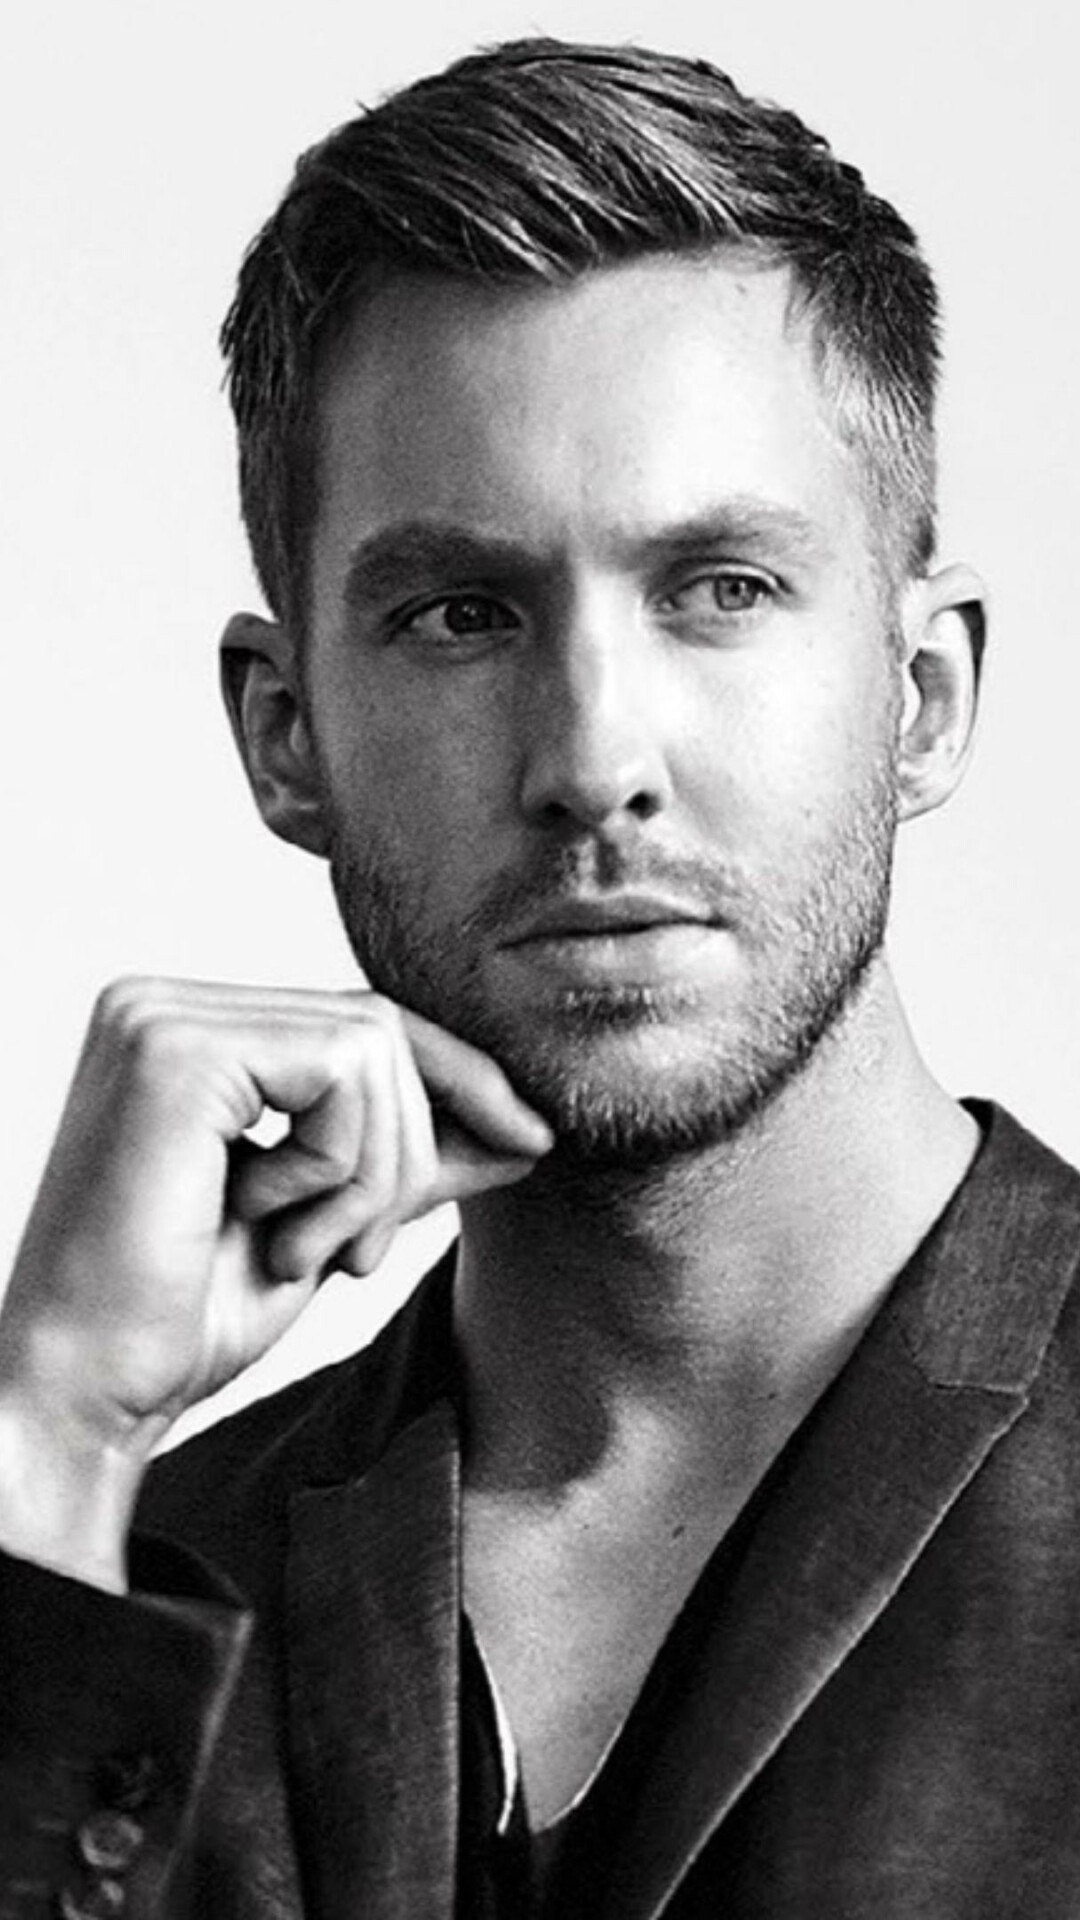 Calvin Harris: "Summer" was released on 14 March 2014 as the second single from his fourth studio album. 1080x1920 Full HD Wallpaper.